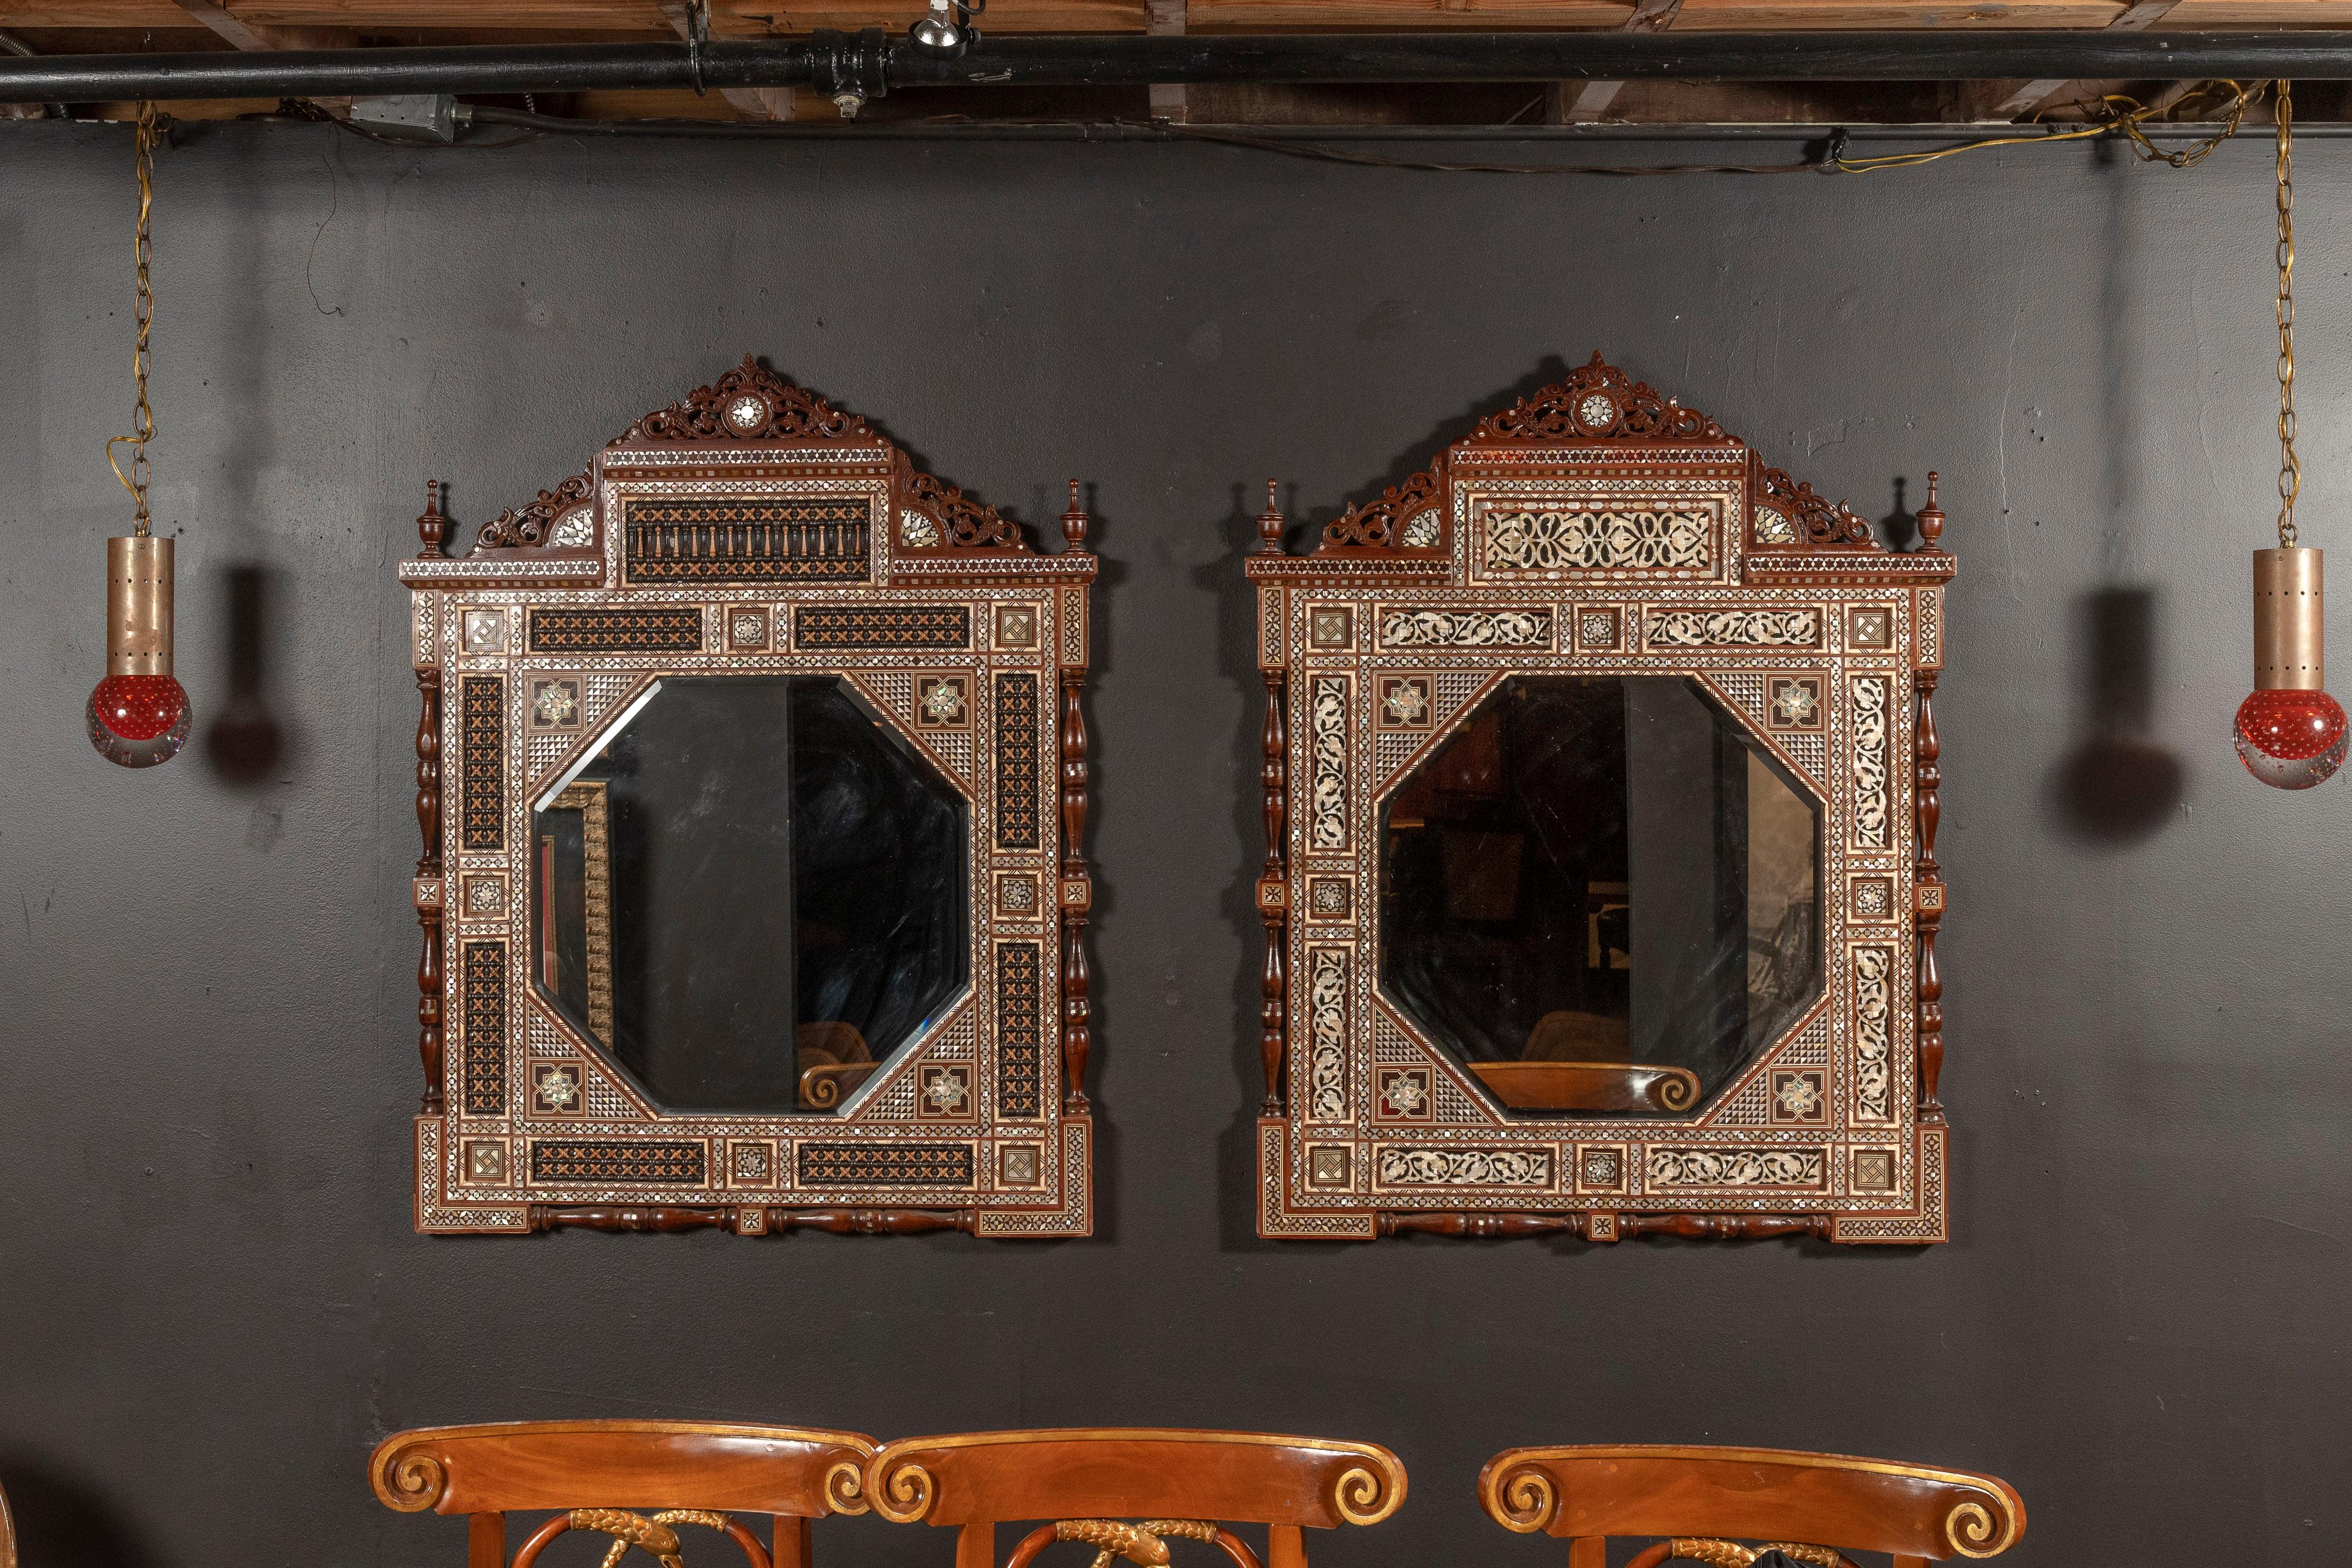 Two unique Syrian wall mirrors with very detailed mother of pearl inlay and intricate marquetry. The octagonal mirror is placed within the finely inlaid frame of floral and other geometric design, finished with a detailed crown. The mirrors are